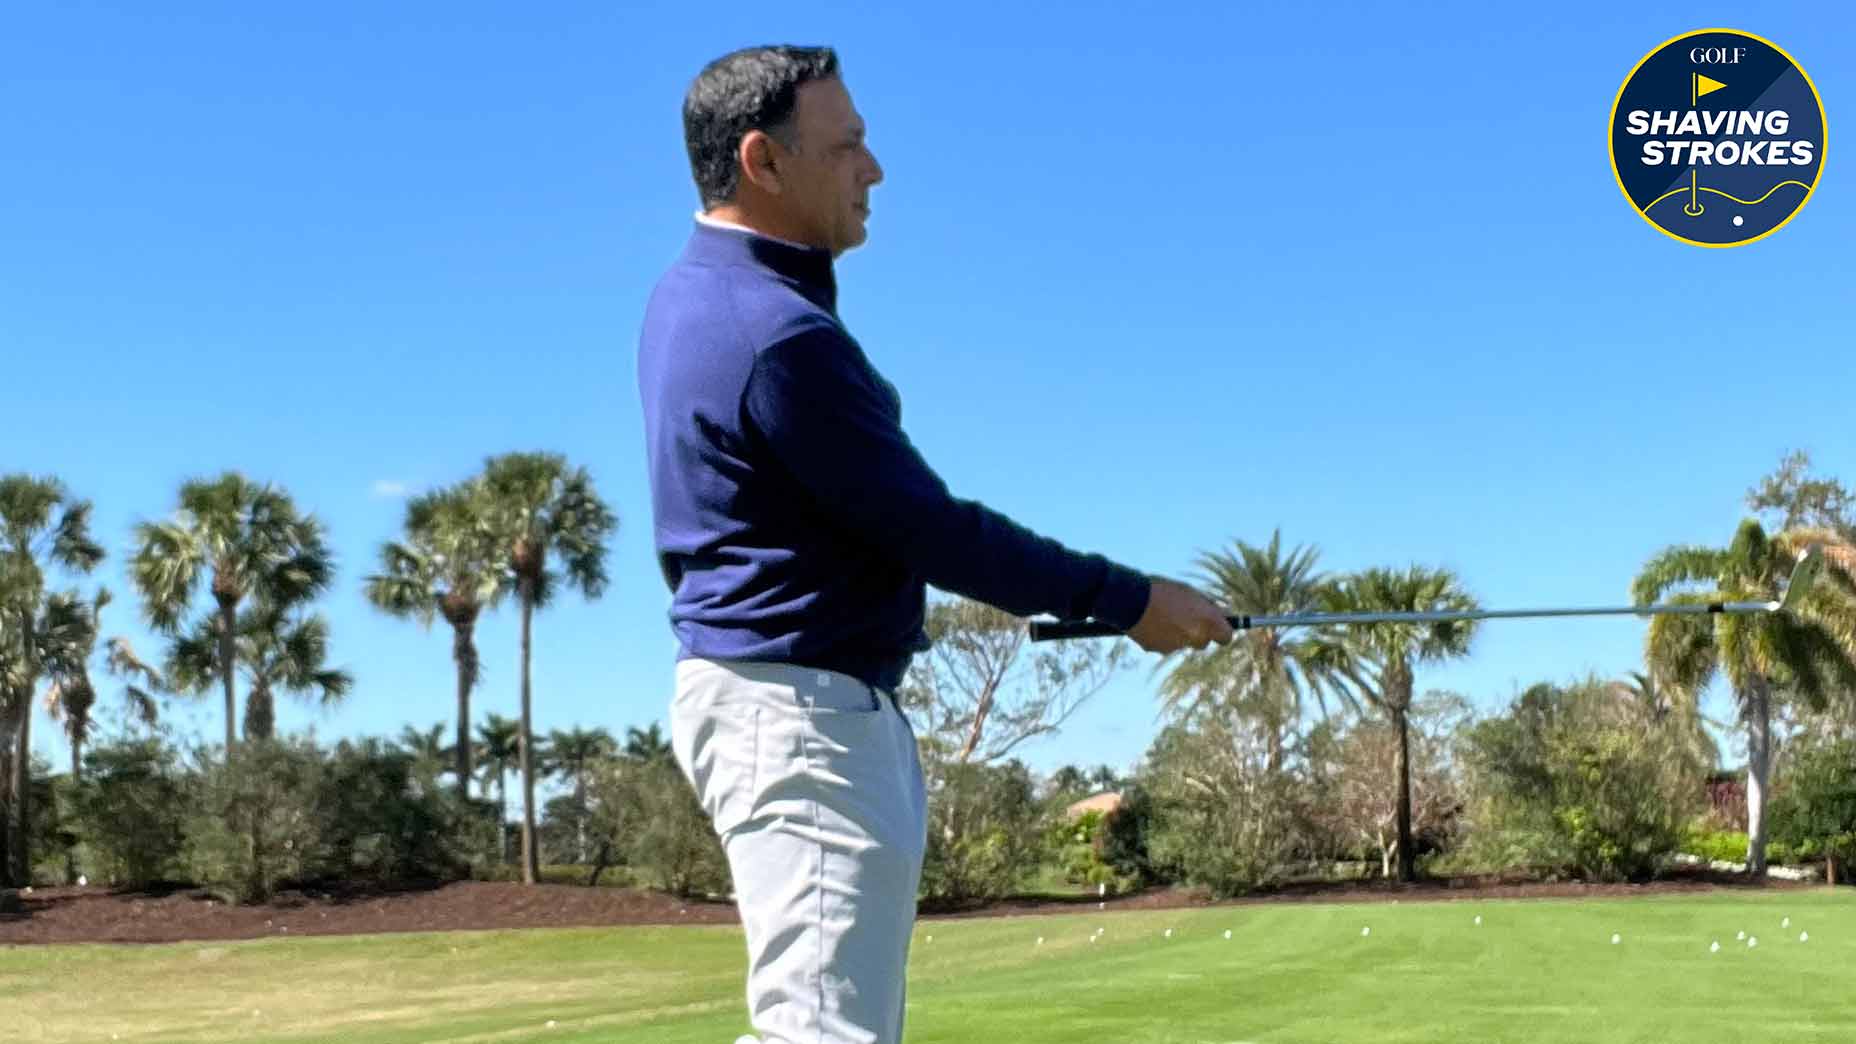 Struggling with wedge shots from near the green? GOLF Top 100 Teacher Mike Malizia shares tips to avoid skulling or chunking ever again